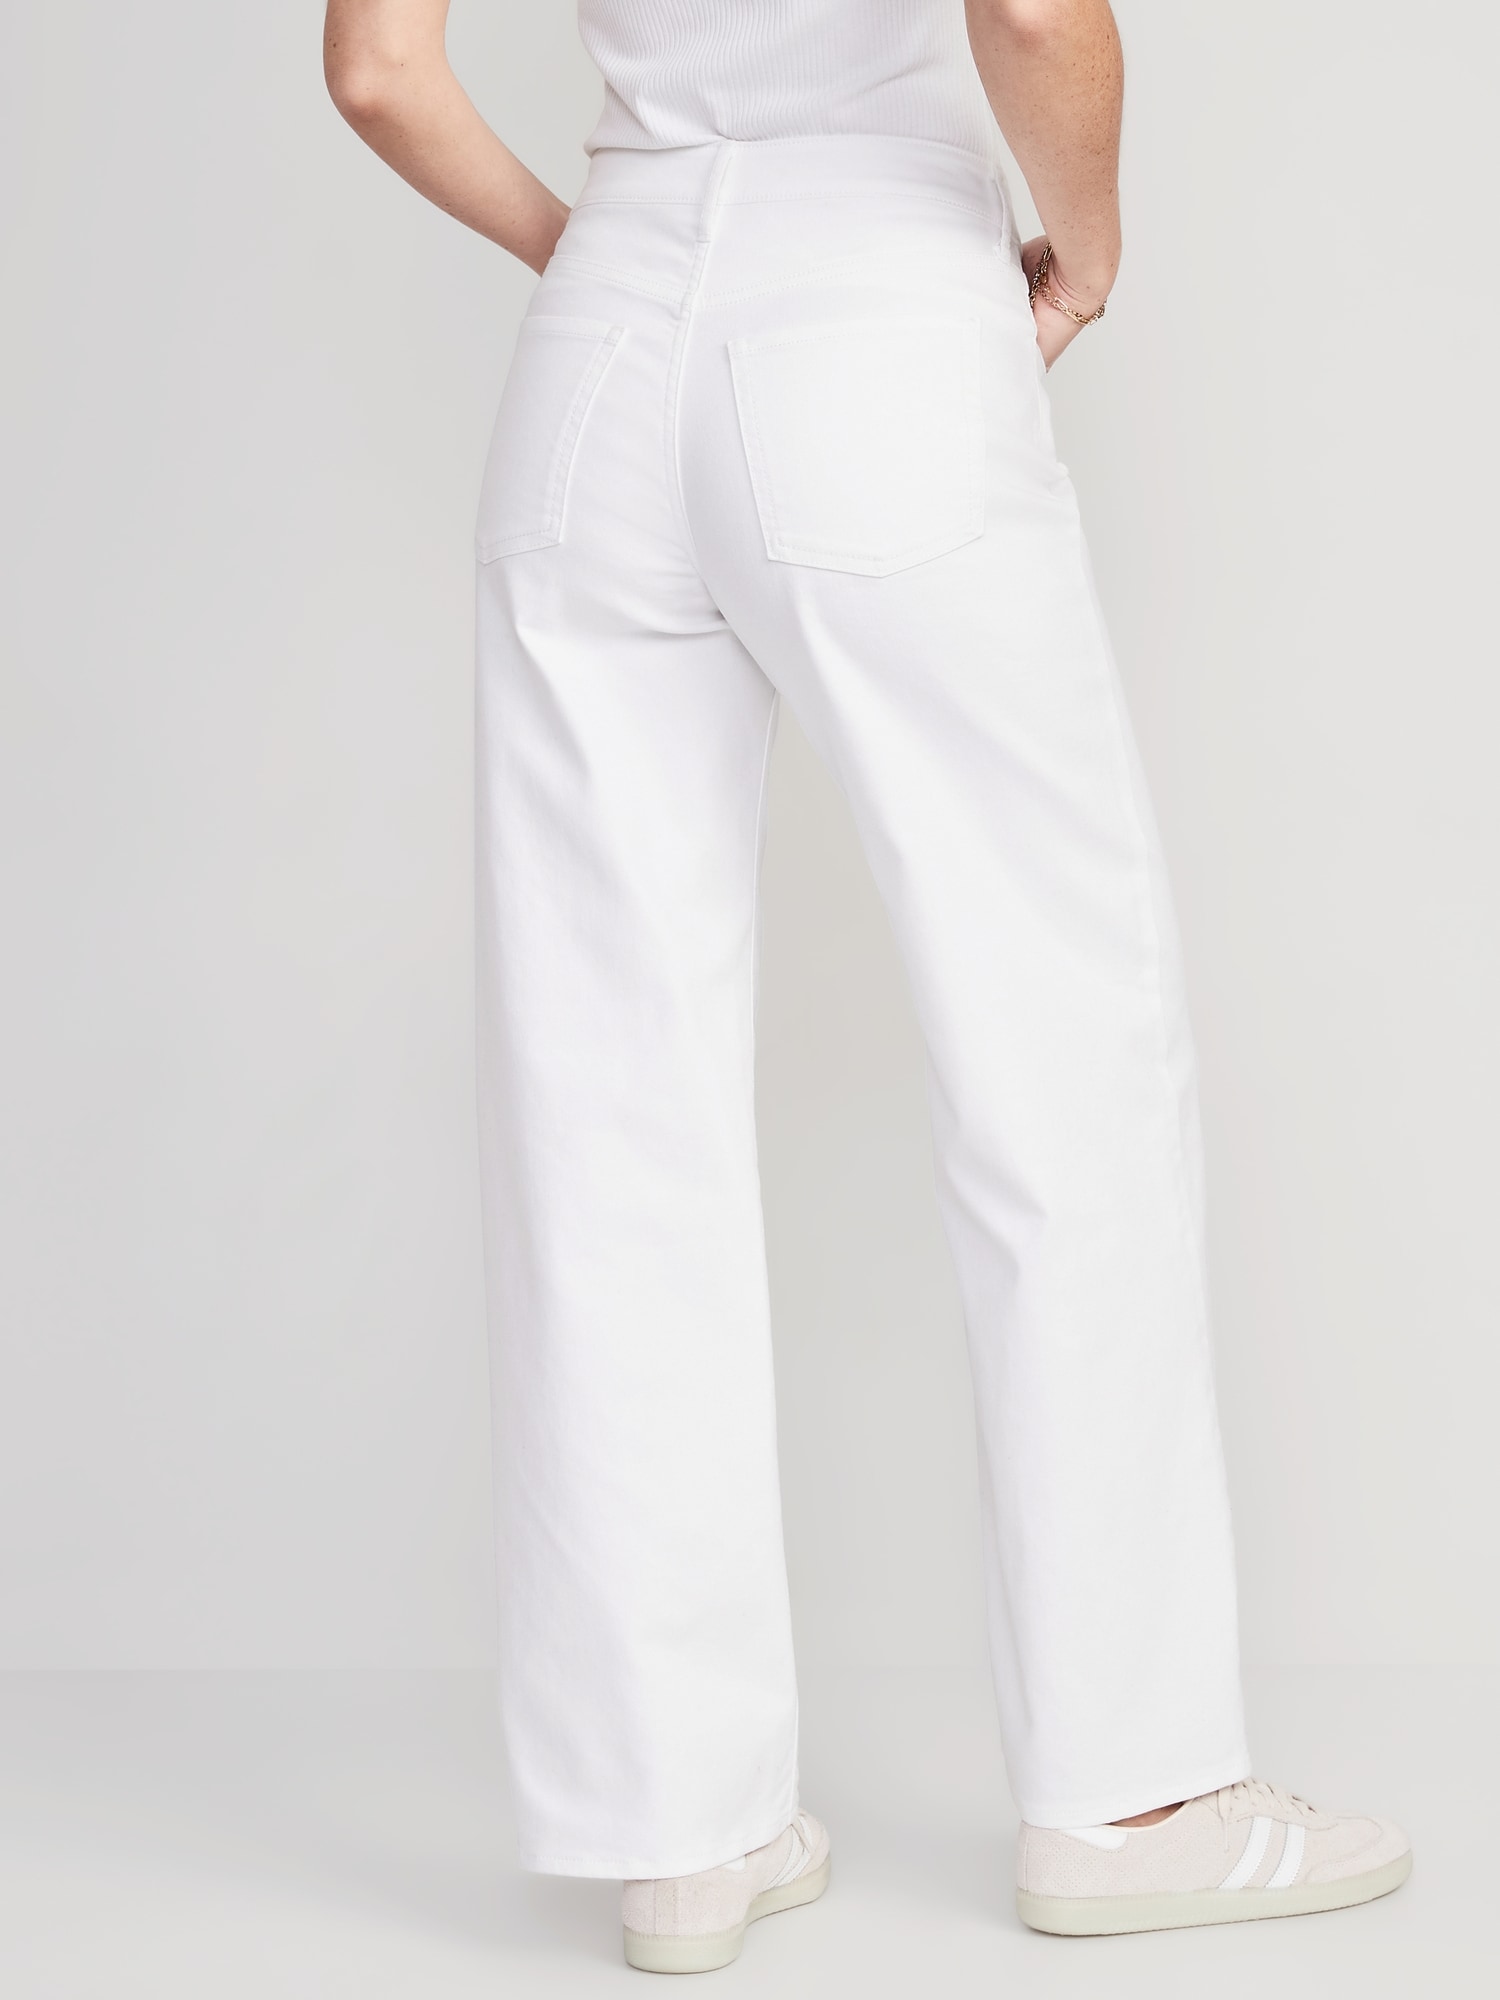 High-Waisted Wow White-Wash Wide-Leg Jeans for Women | Old Navy